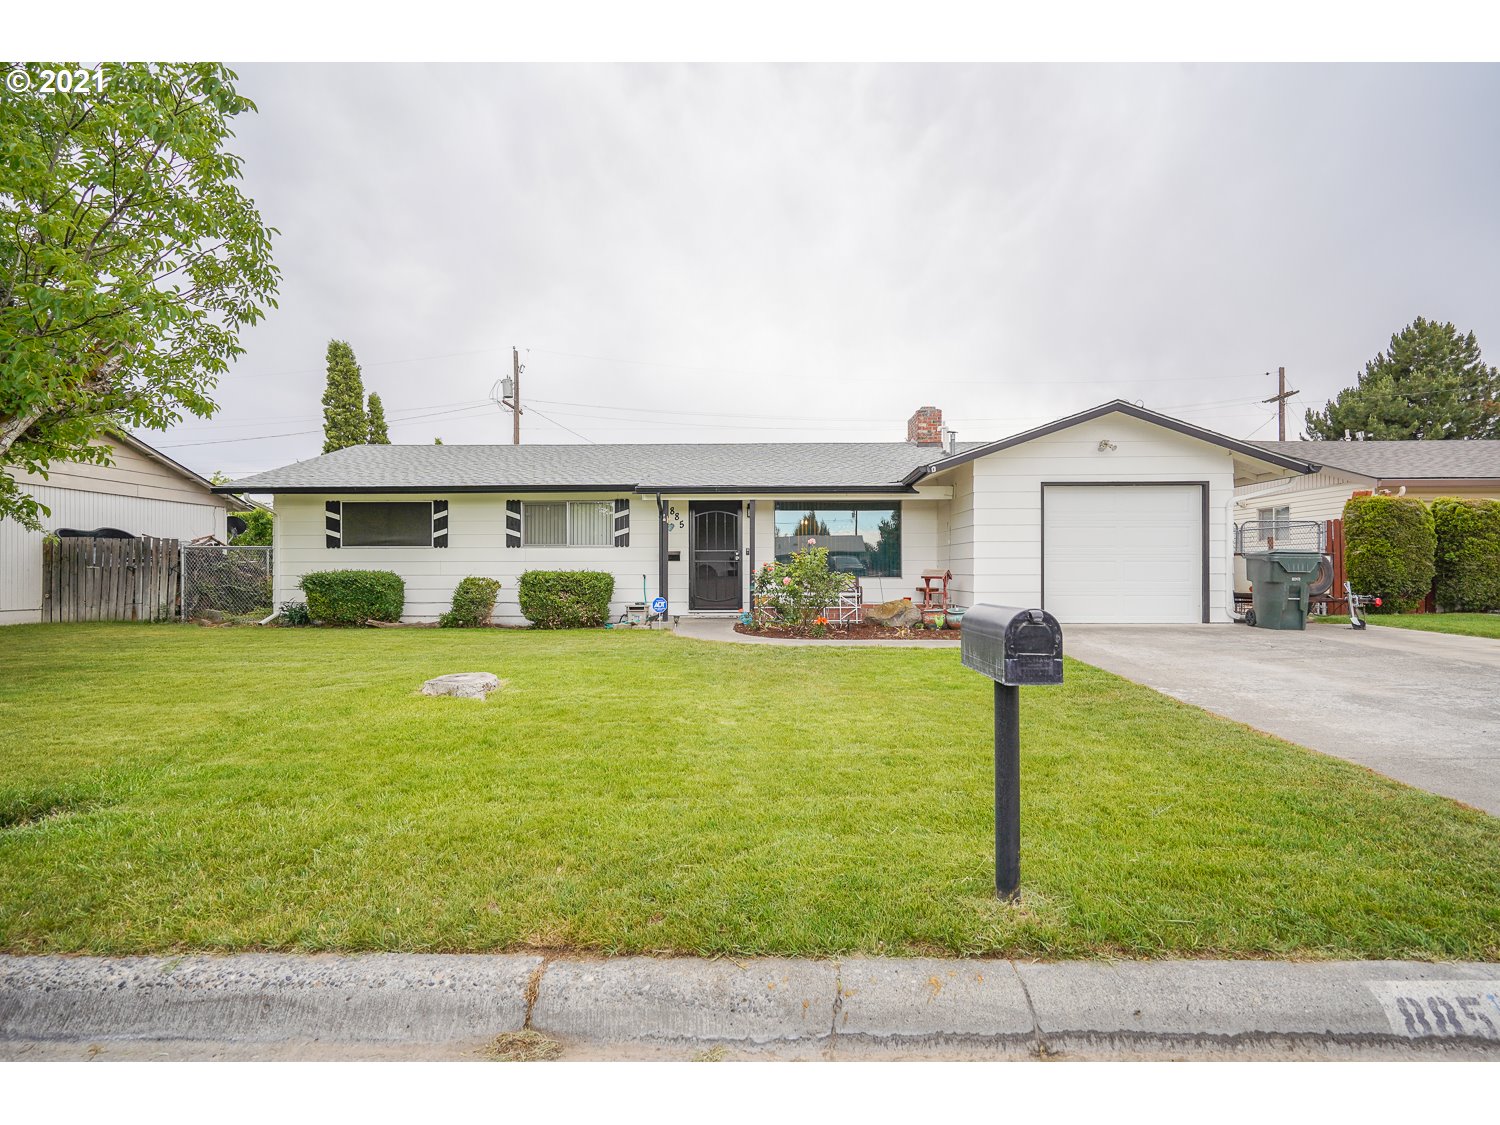 885 W QUINCE AVE (1 of 27)